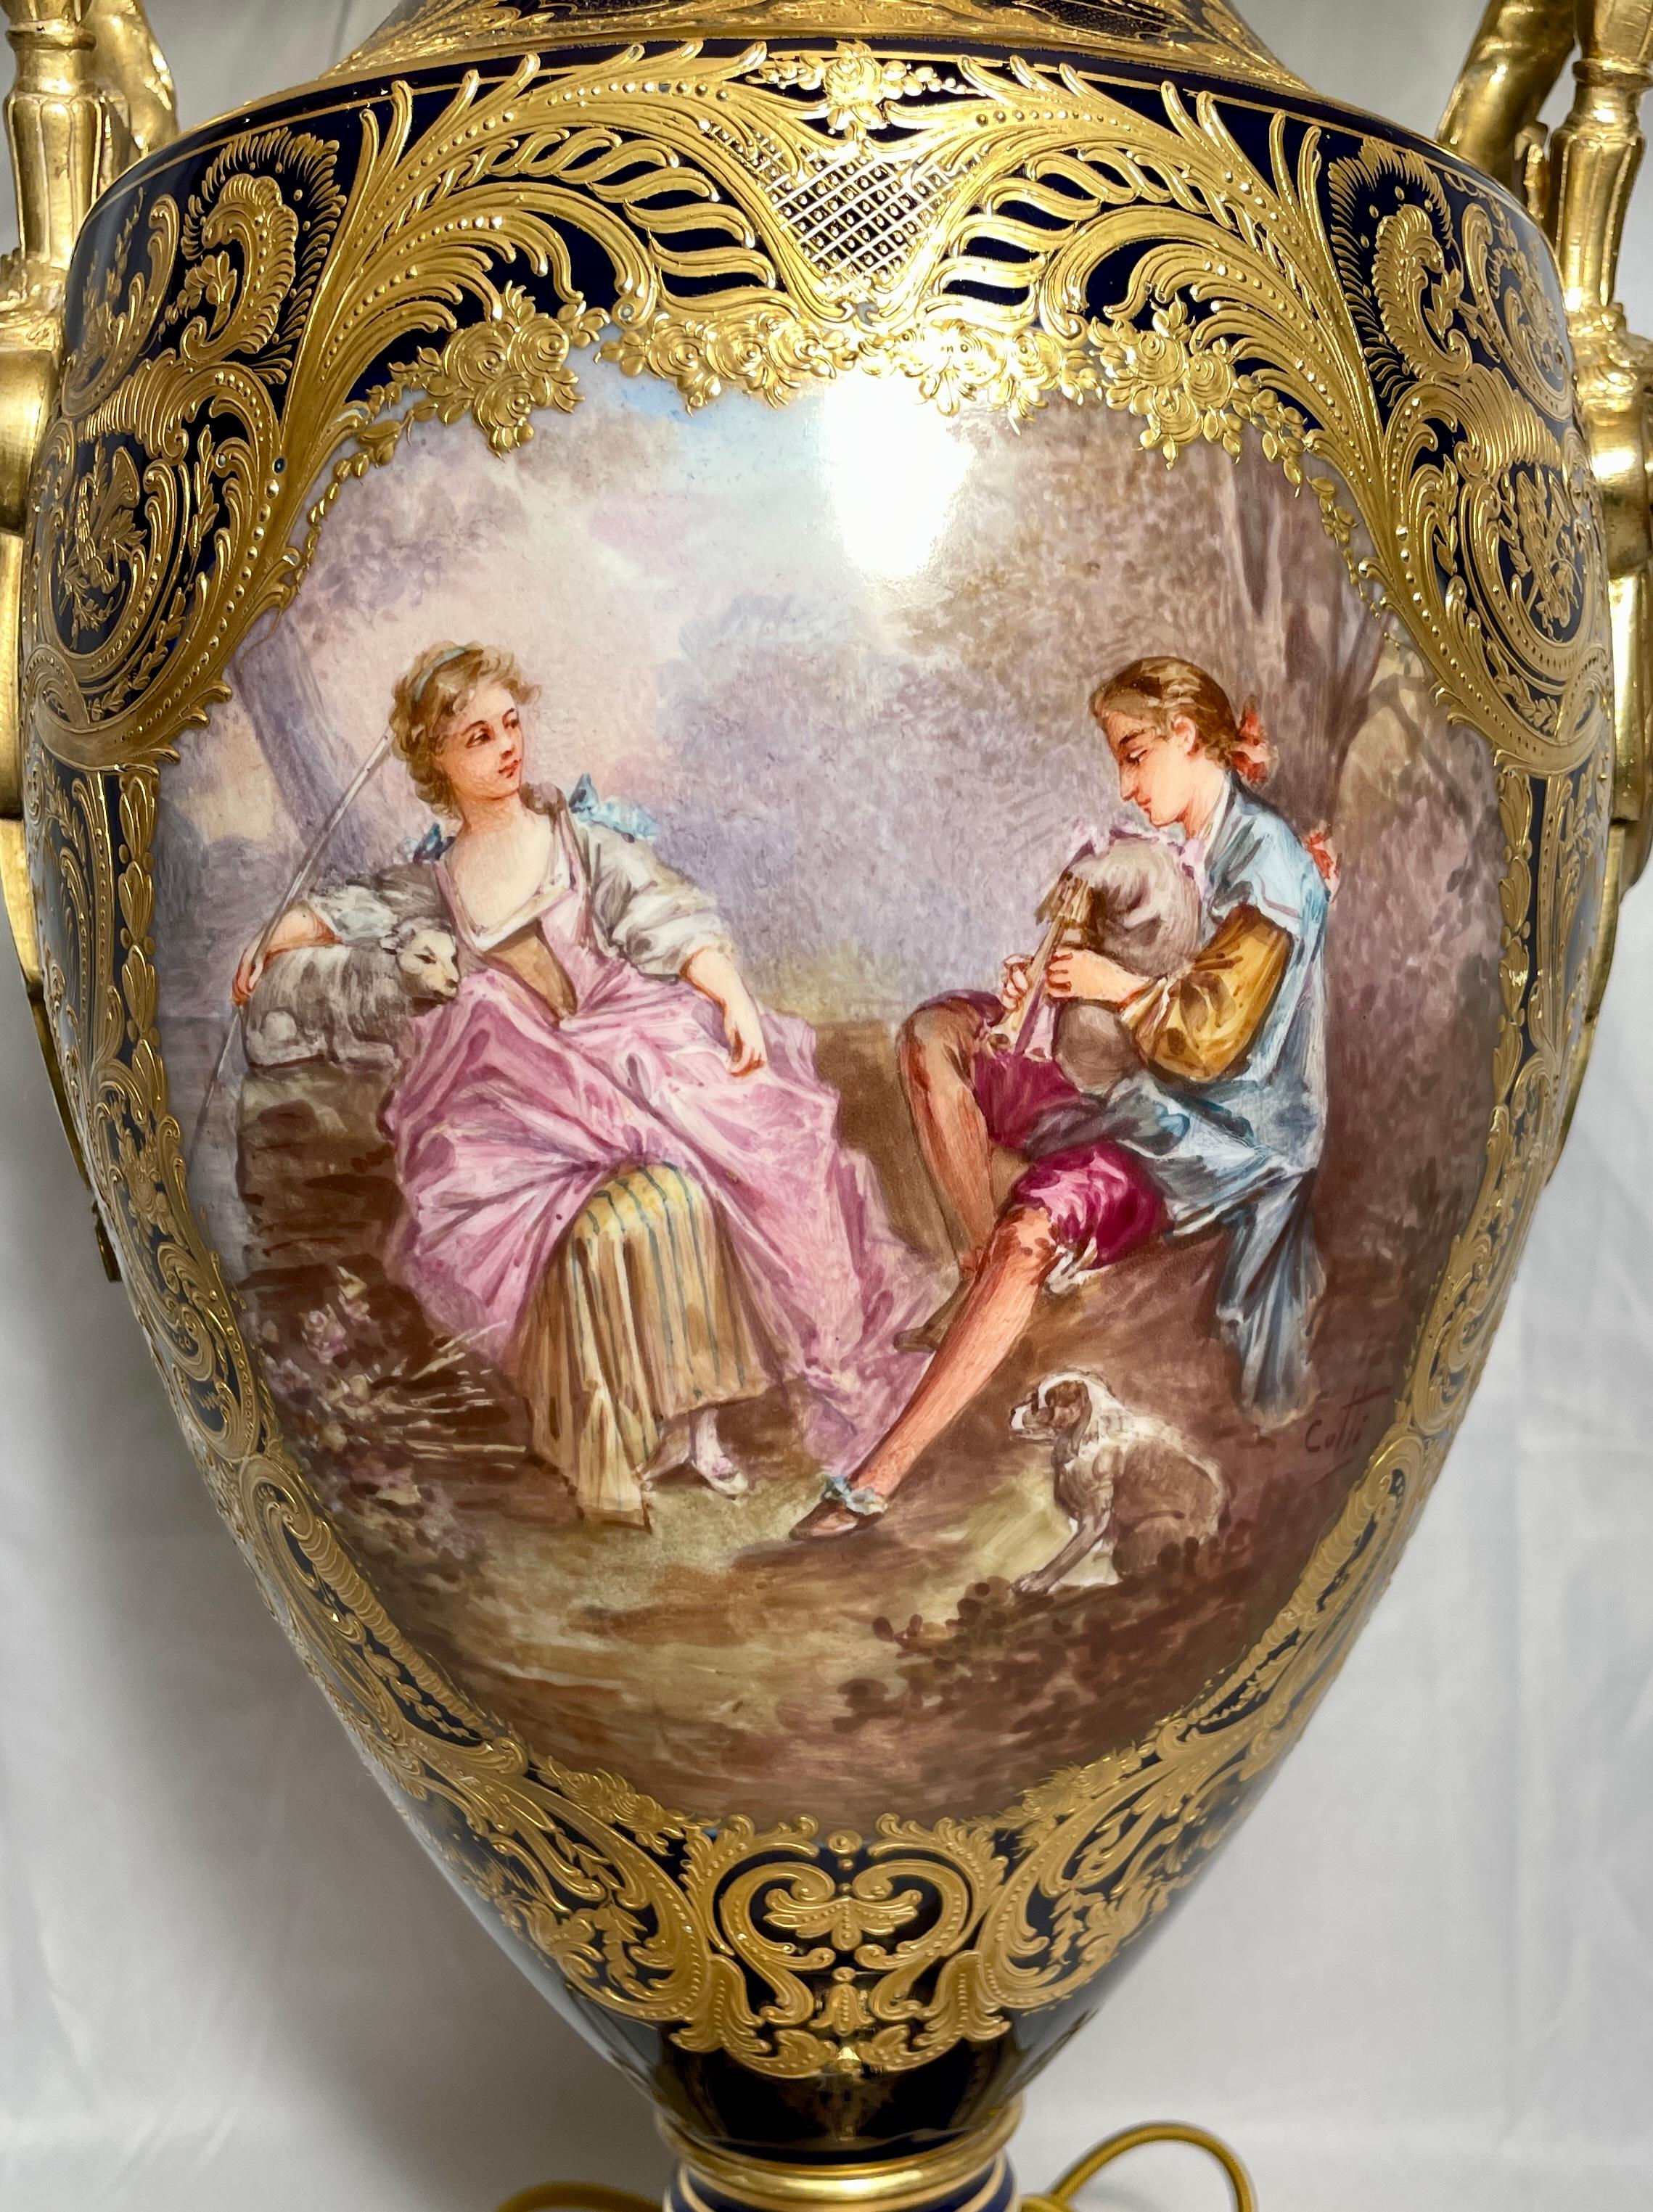 Antique French Gold Encrusted Cobalt Sèvres Porcelain Urn Converted to Lamp In Good Condition For Sale In New Orleans, LA